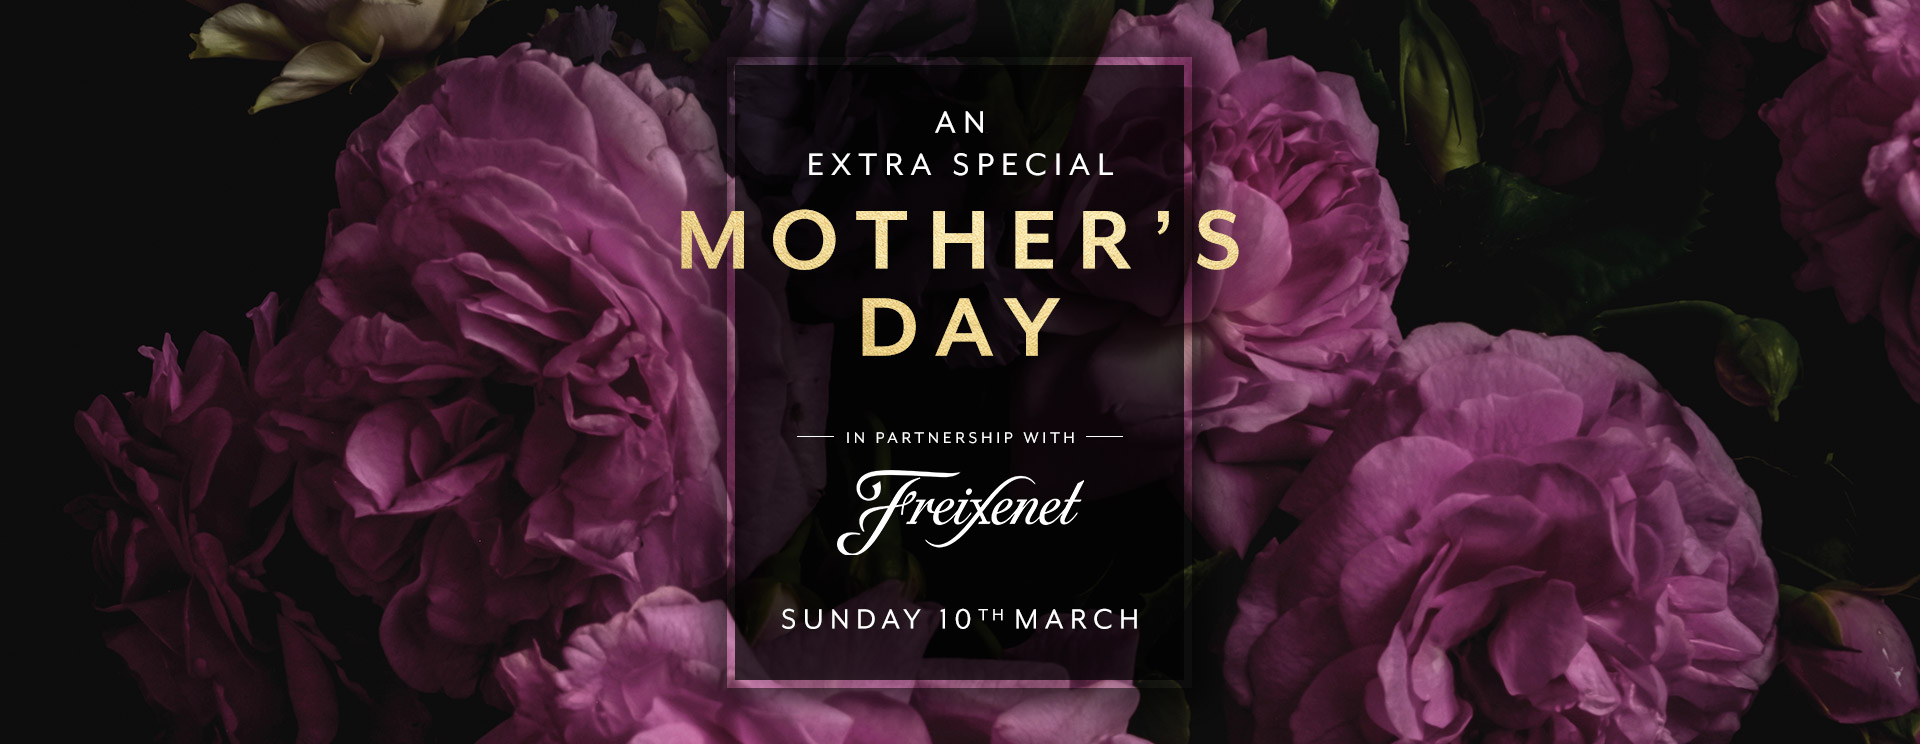 Mother’s Day menu/meal in Betchworth